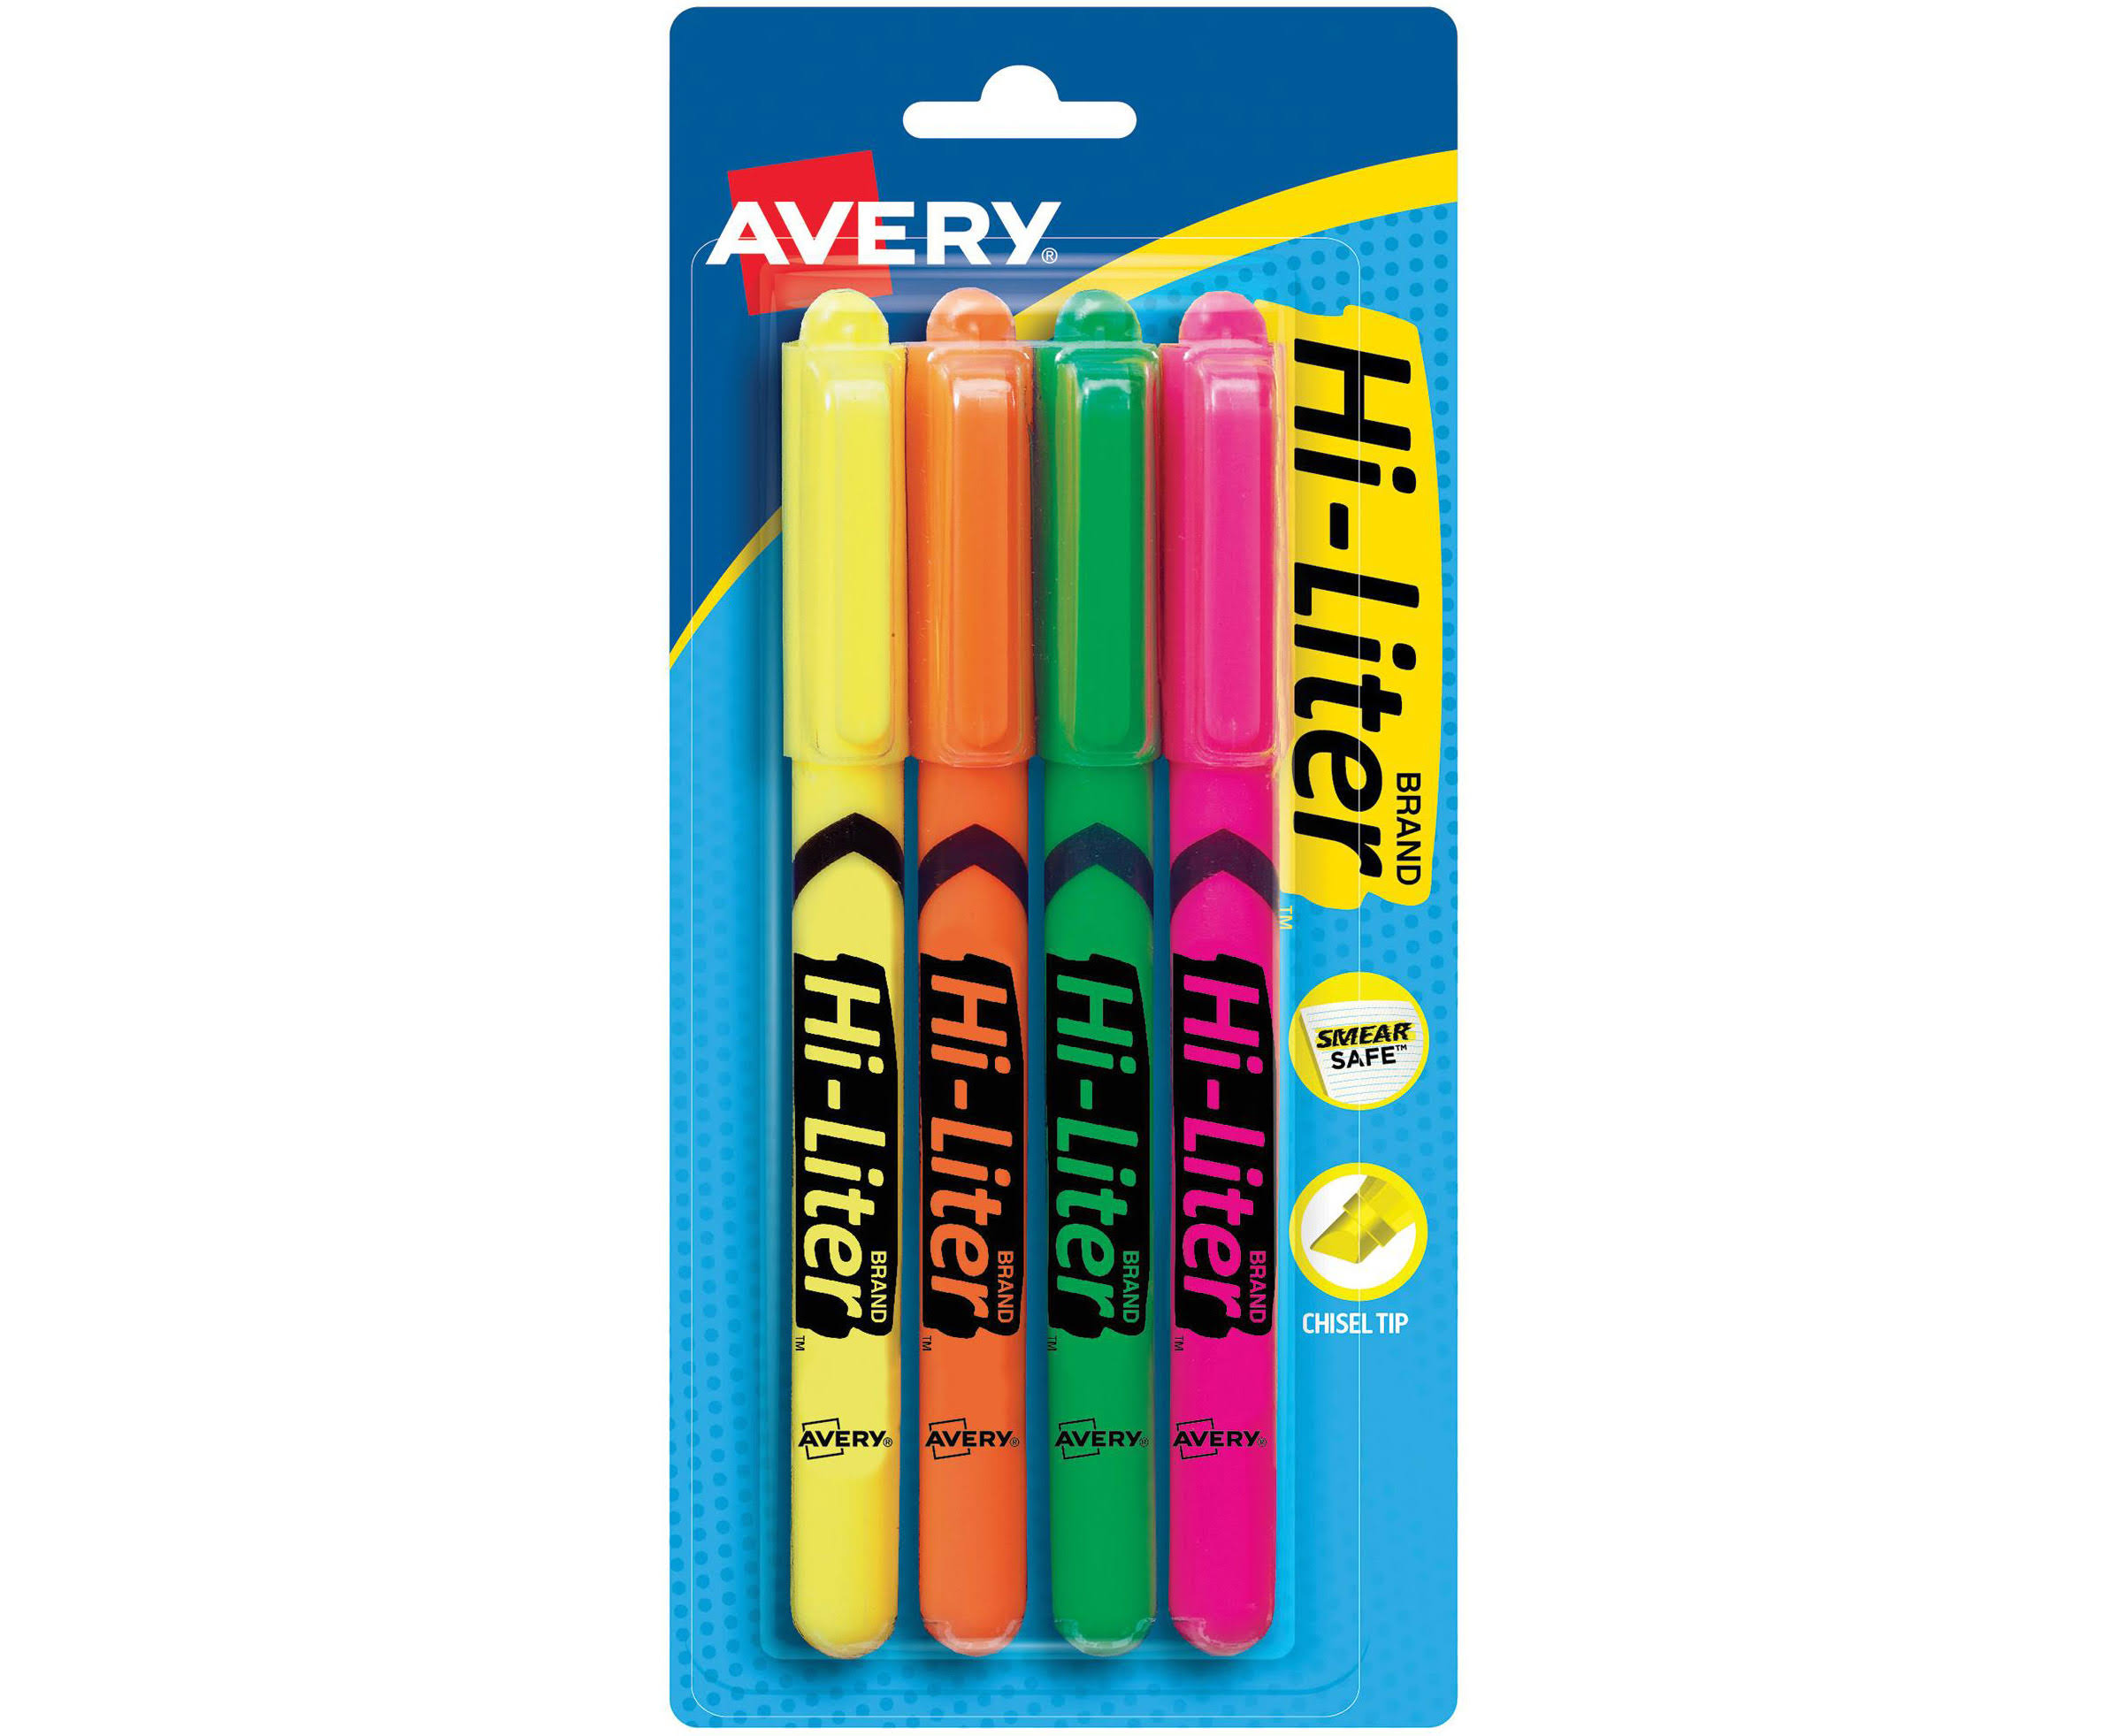 Avery Pen Style Fluorescent Highlighters - Assorted Colors, 4pk